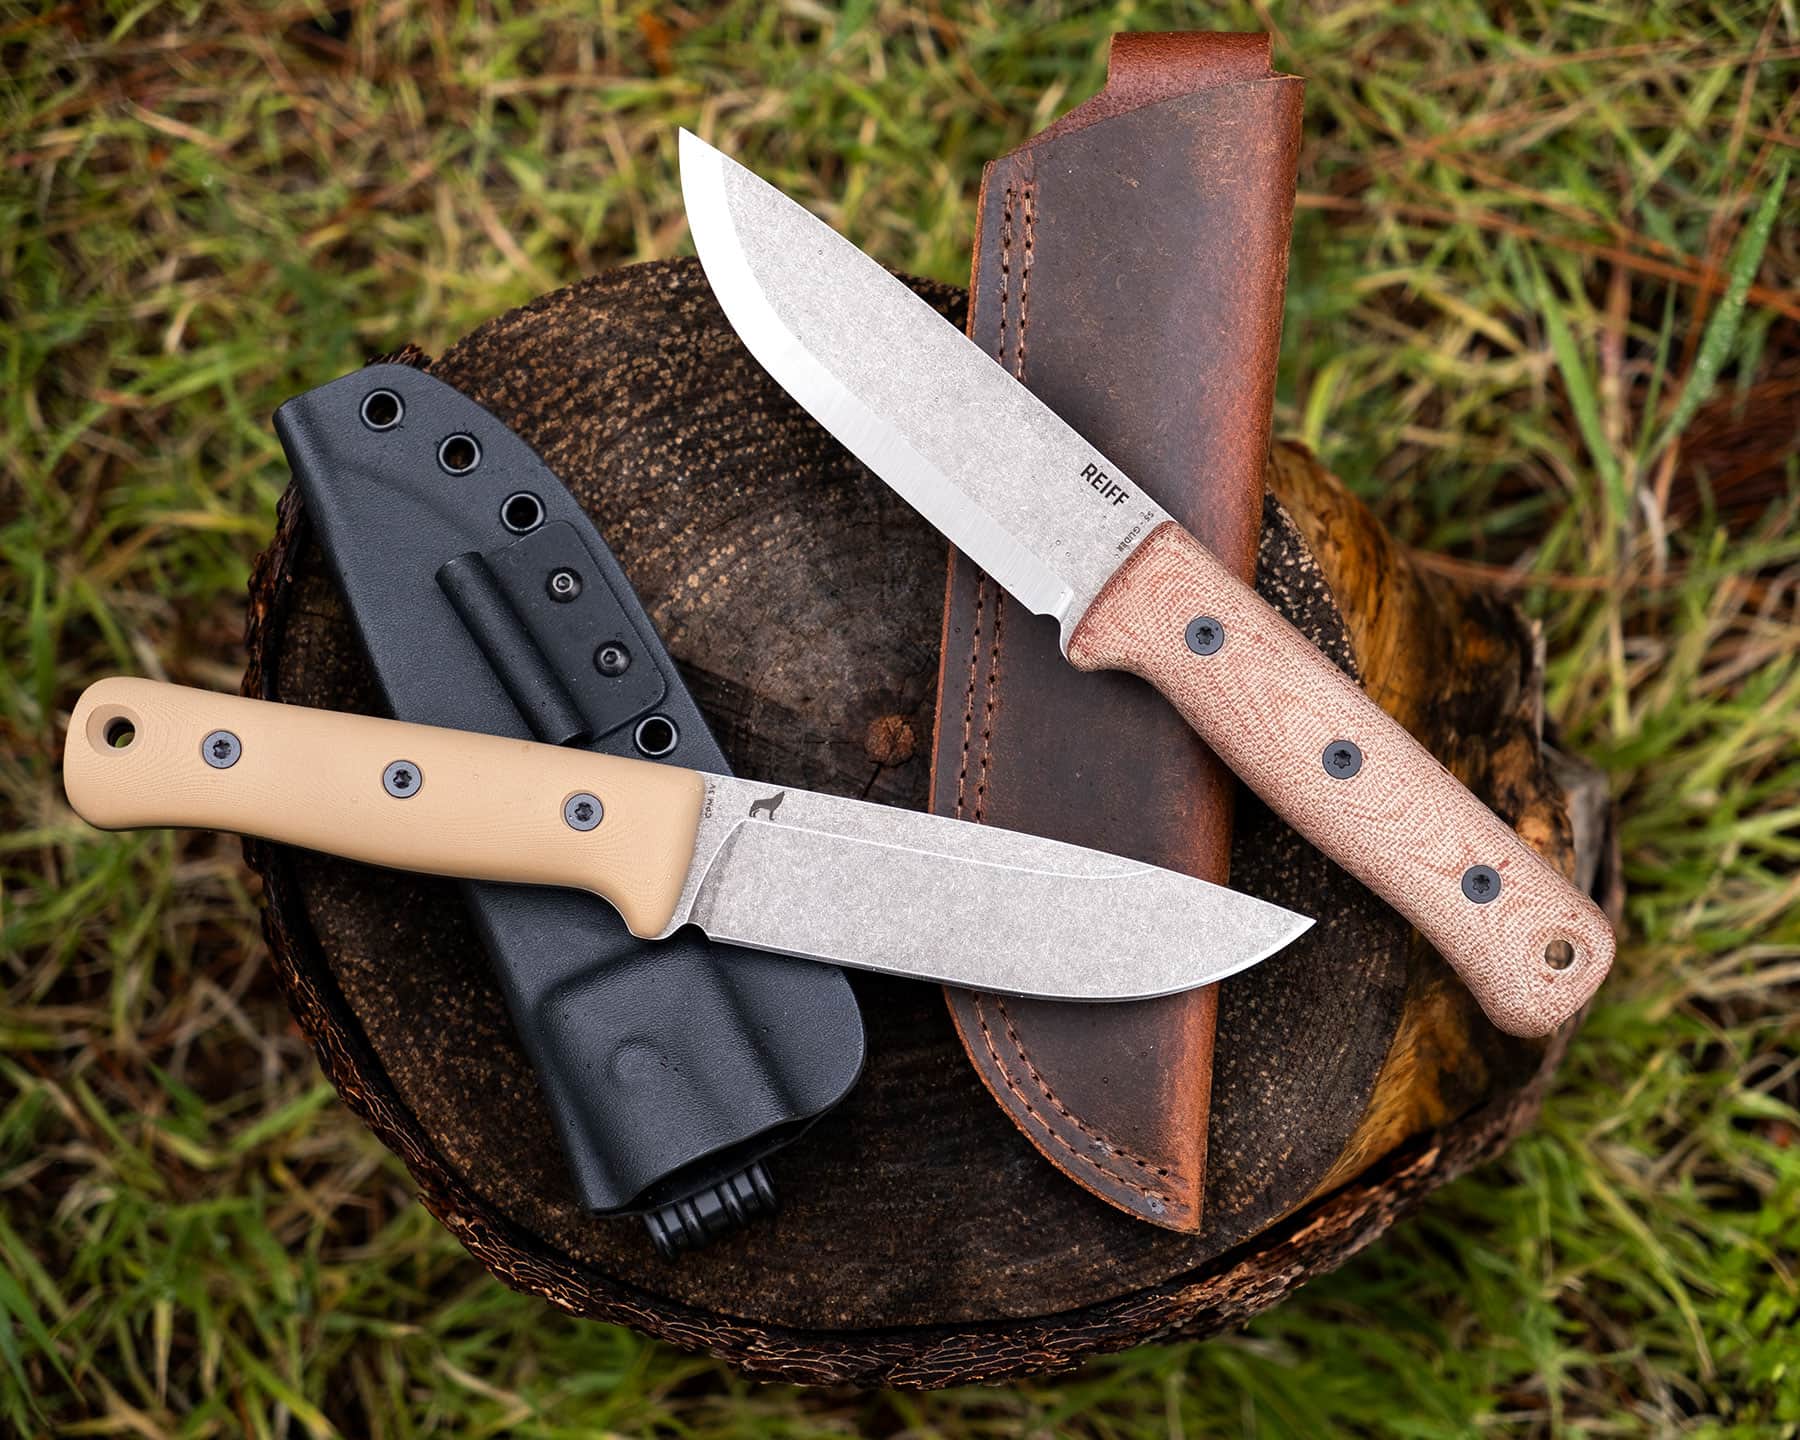 The Reiff F5 ships with a leather sheath and the Sf ships with a kydex sheath